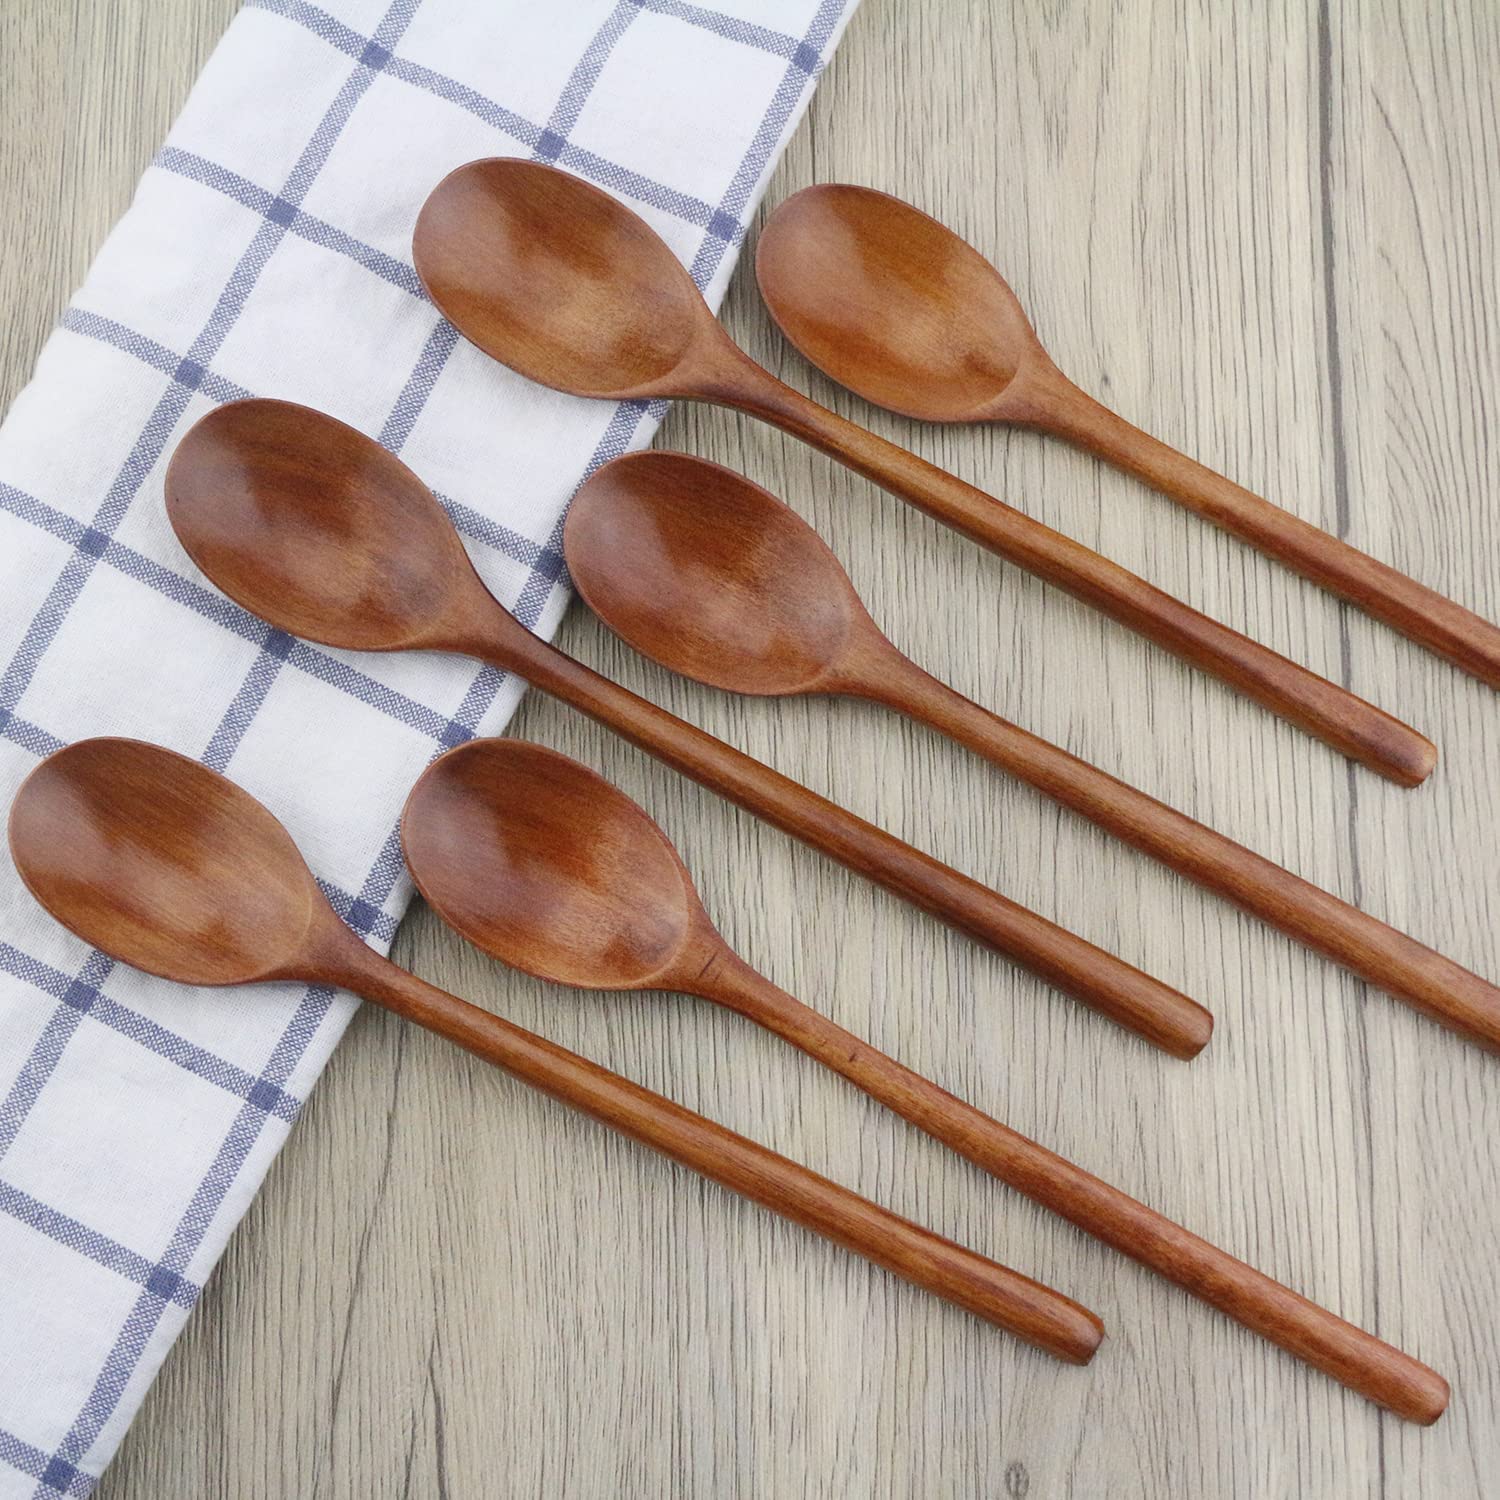 6pcs Wooden Soup Spoon Stirring Spoon Long Handled Spoon Japanese Style ...